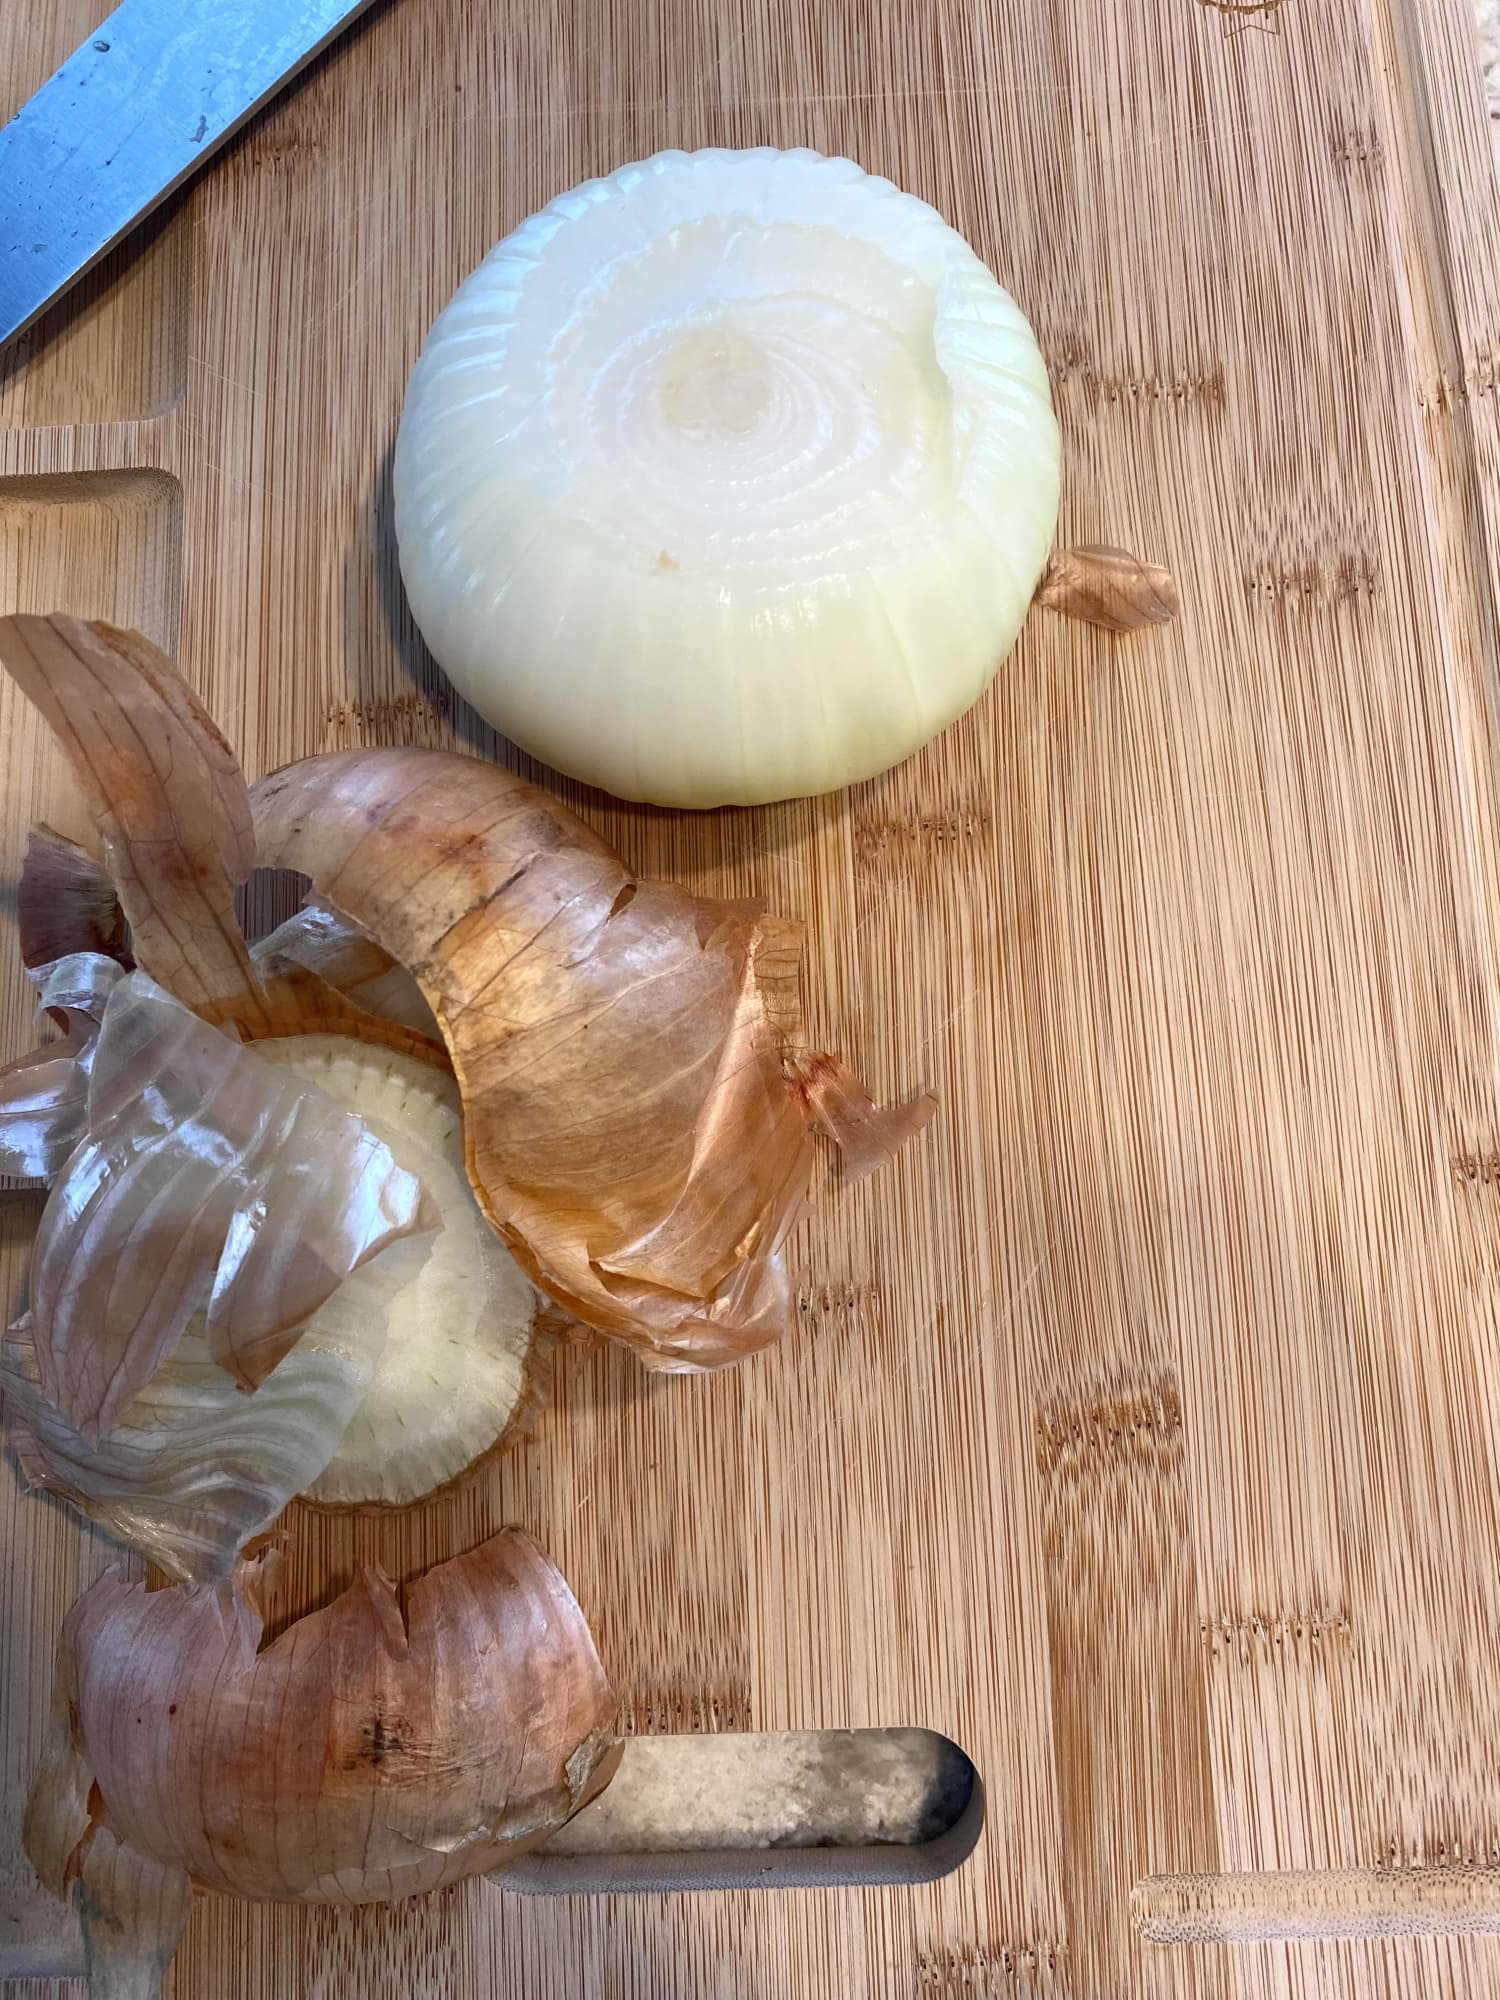 I Tried This No-Fuss Onion-Peeling Hack and It’s the Only Method I Want to Use Now